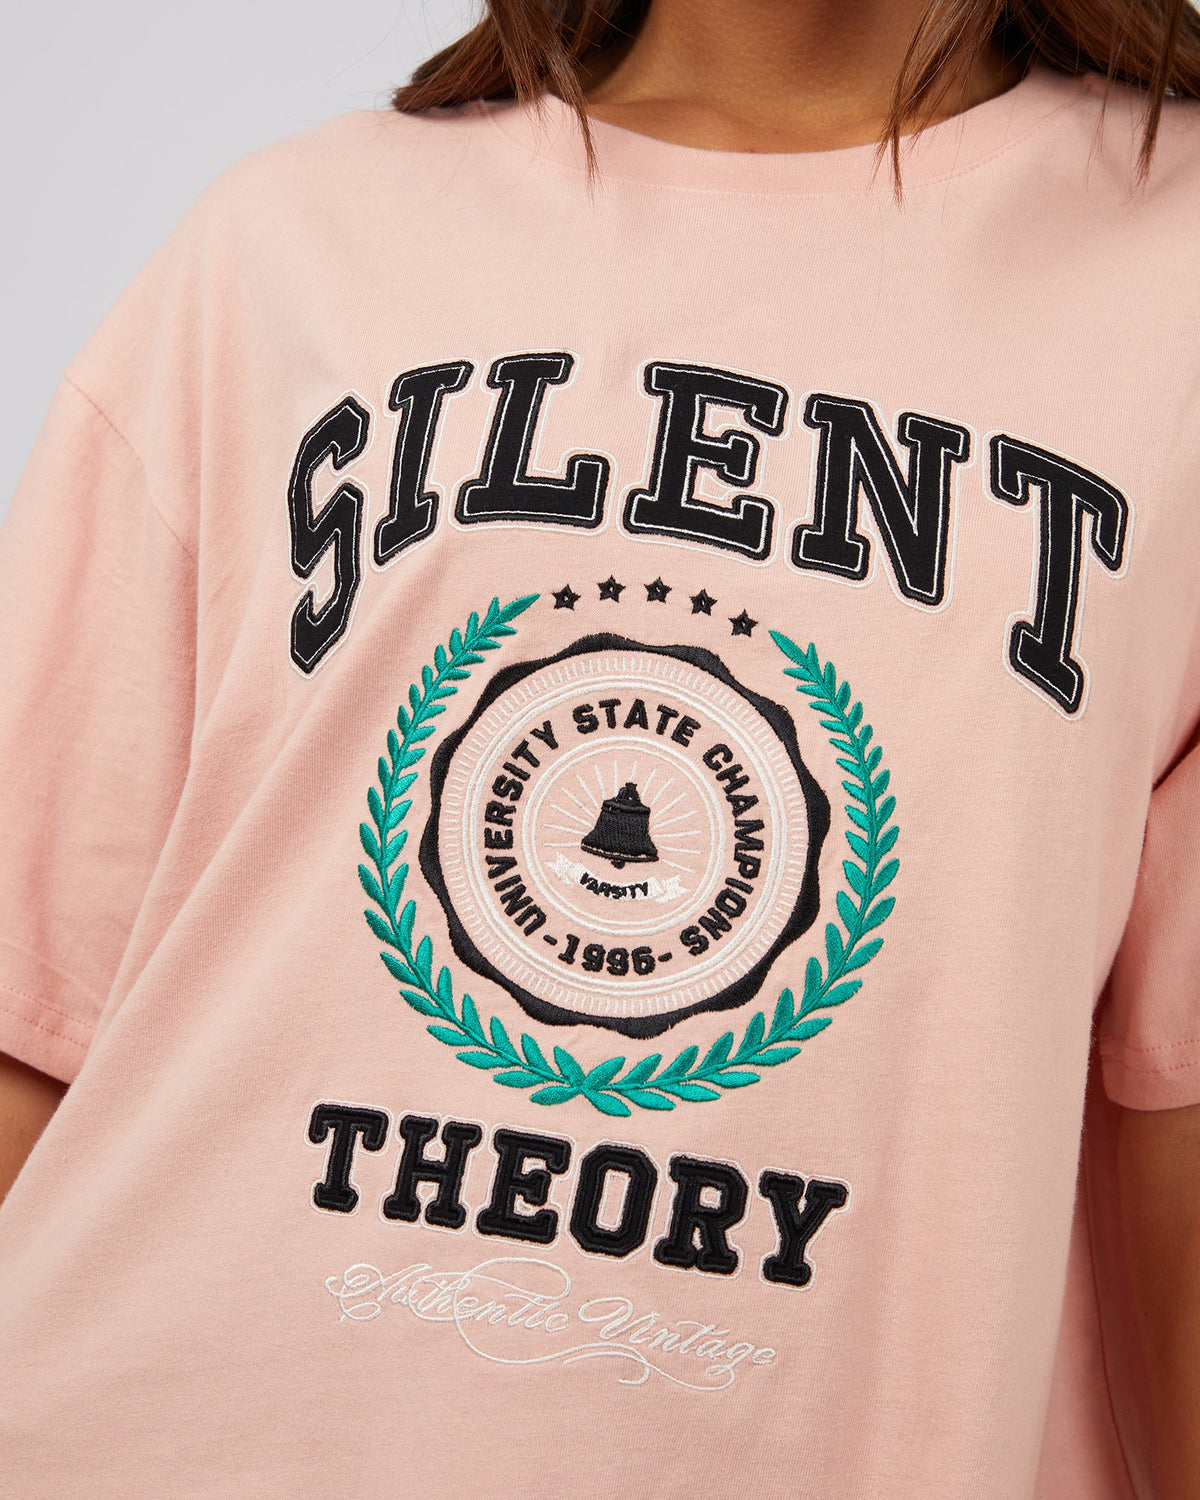 Silent Theory Ladies-A Team Tee Pale Pink-Edge Clothing